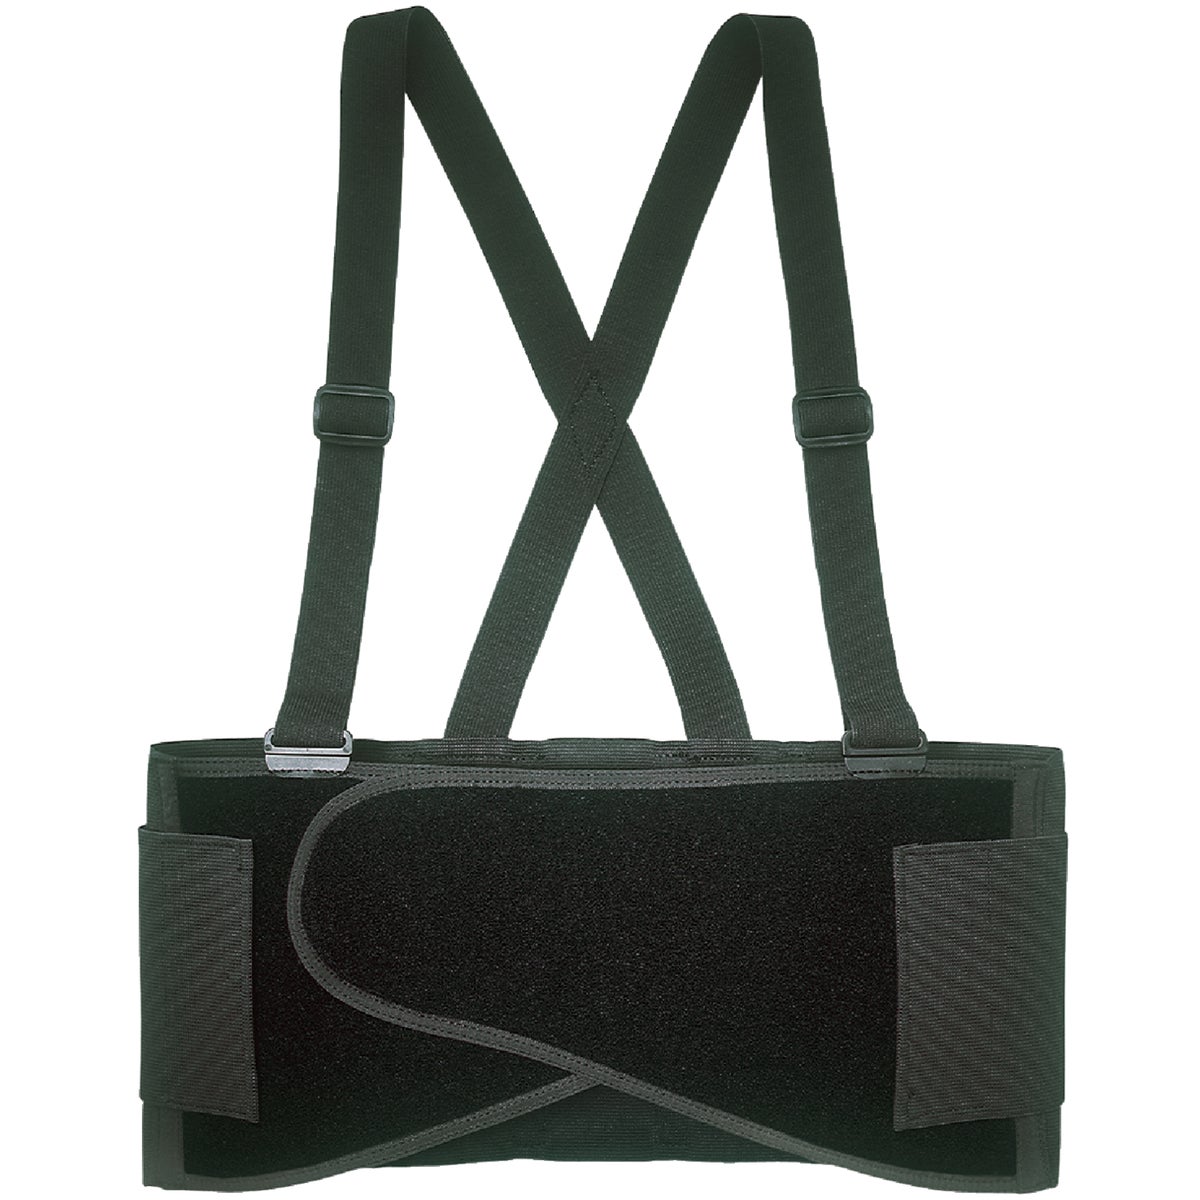 Item 372137, Bacbelt has adjustable elastic suspenders for a comfortable fit.